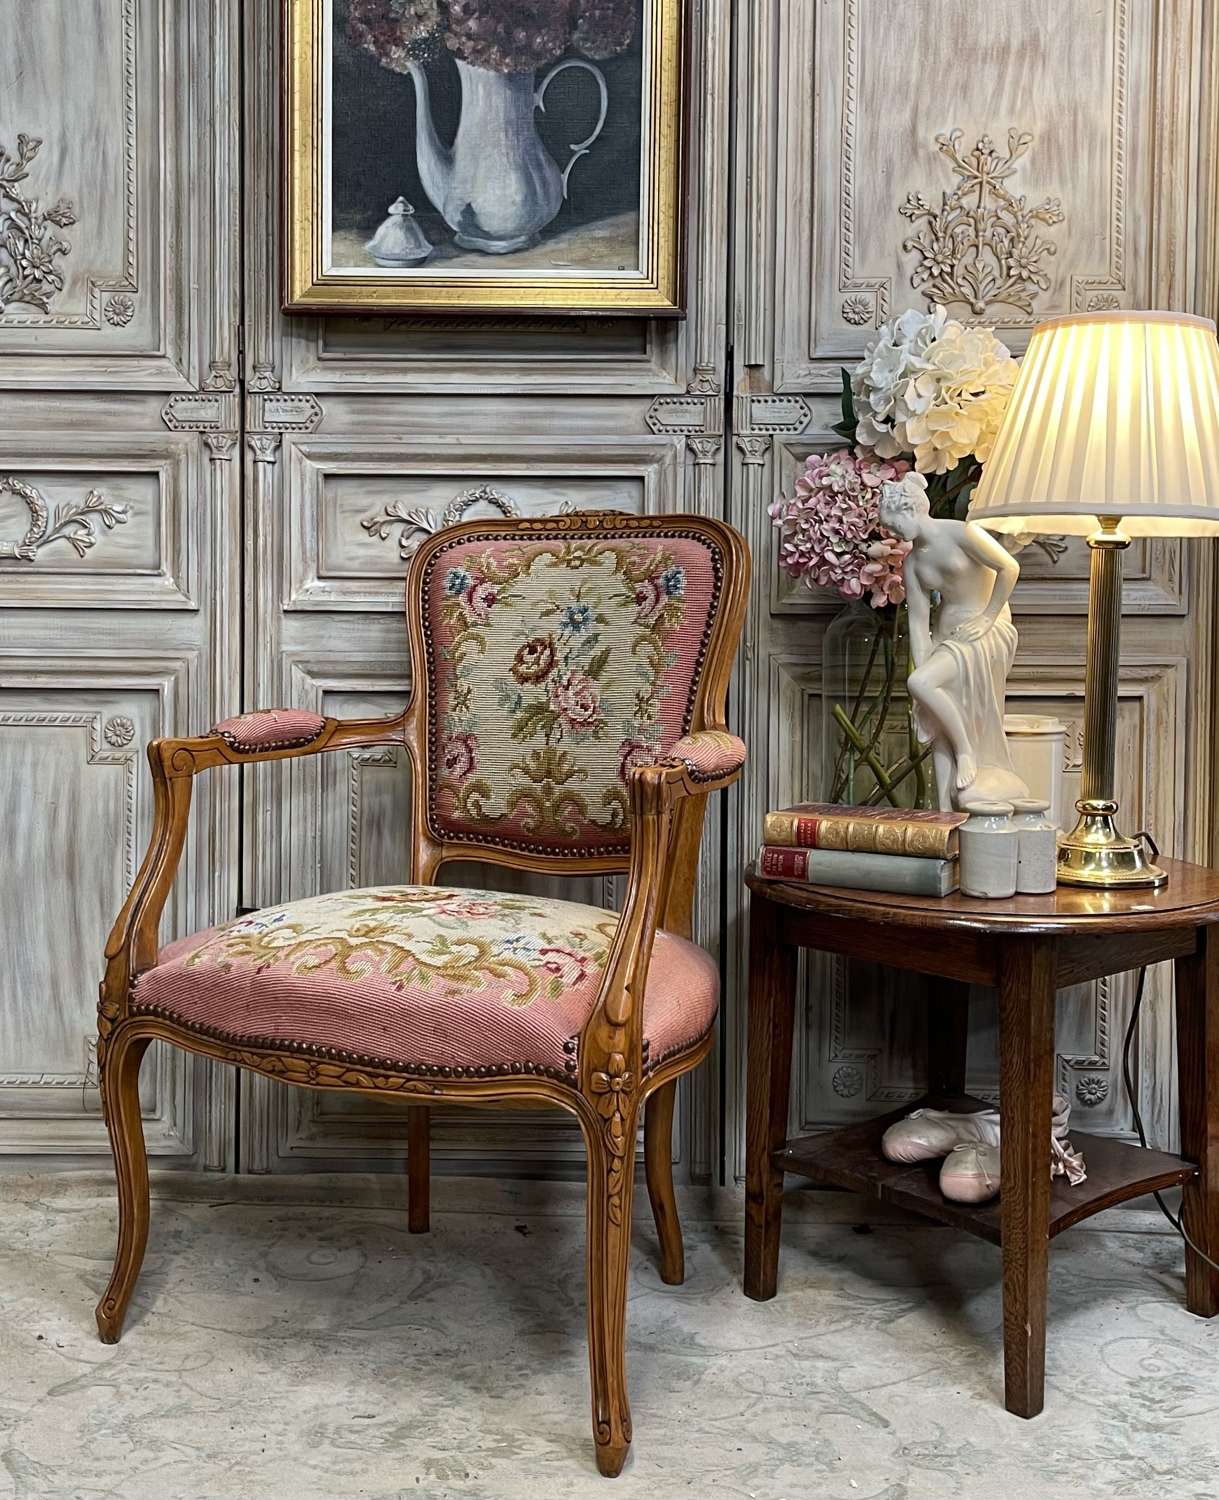 Vintage French tapestry chair